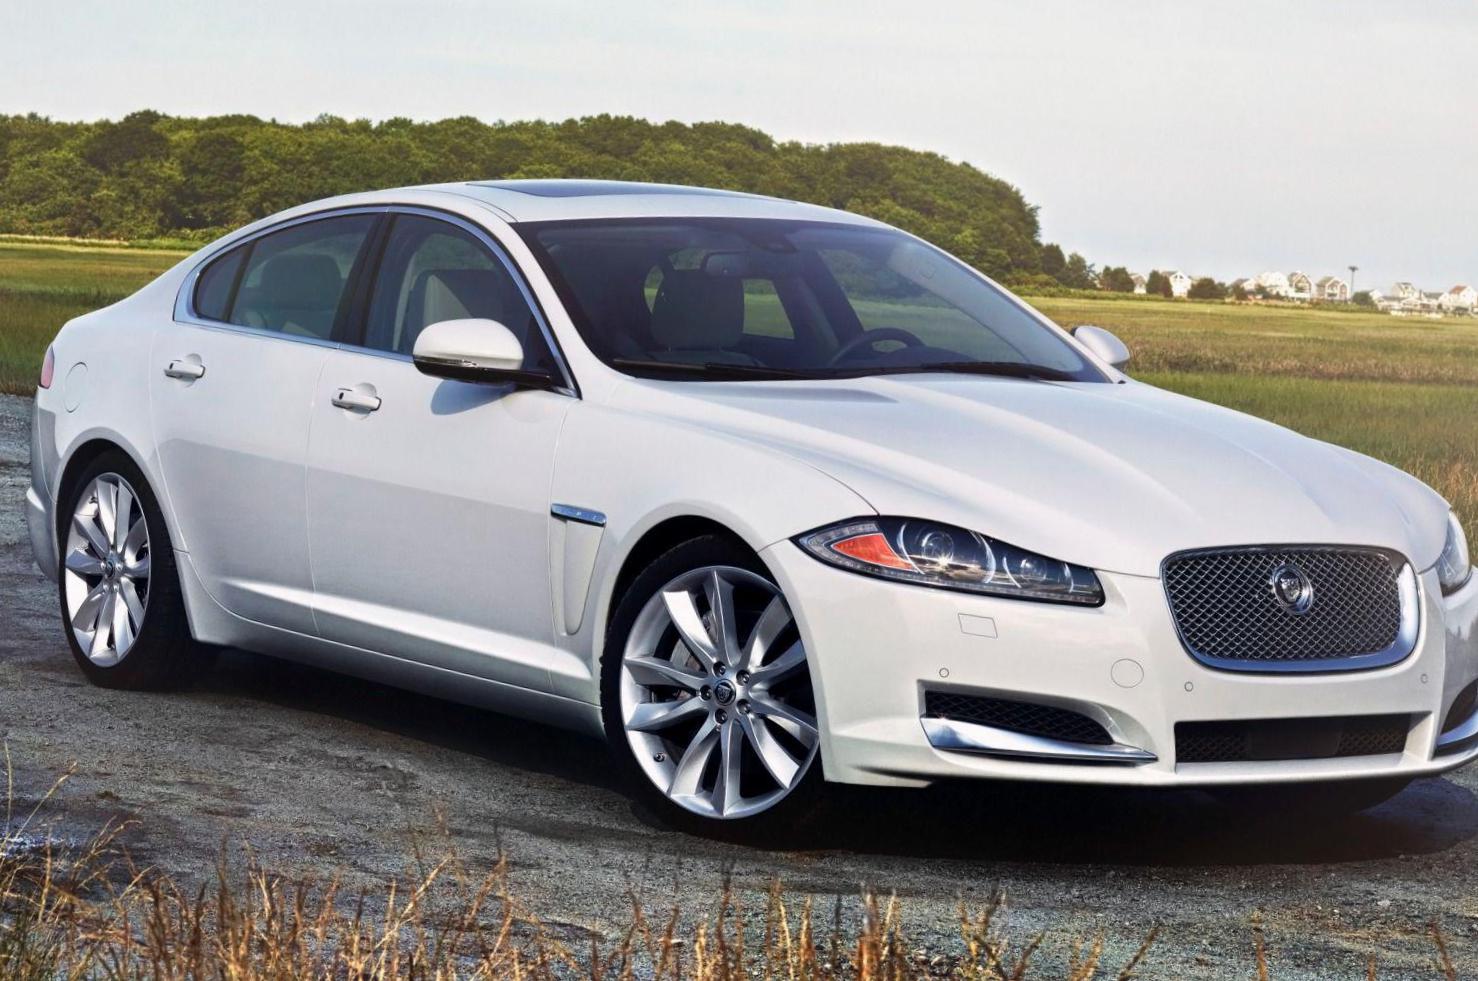 XF Jaguar approved wagon